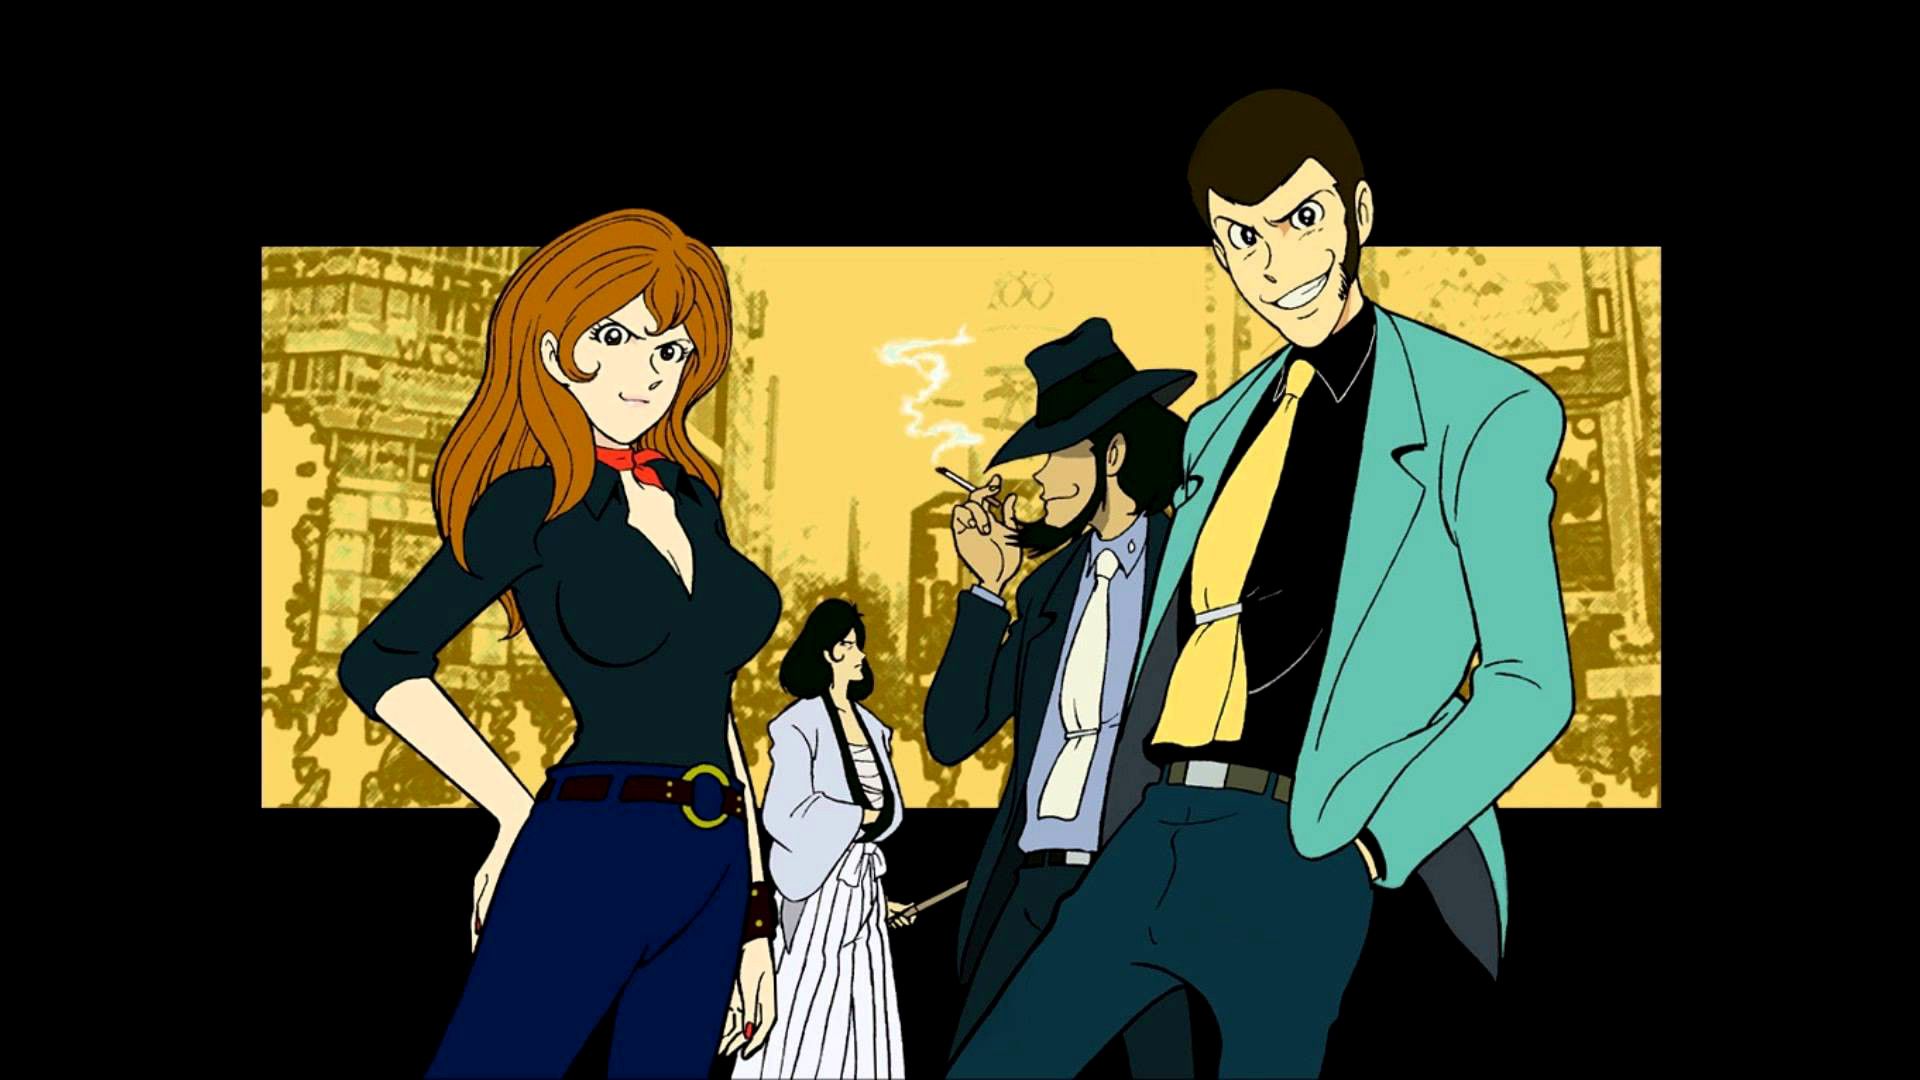 Lupin the 3rd: Castle of Cagliostro background